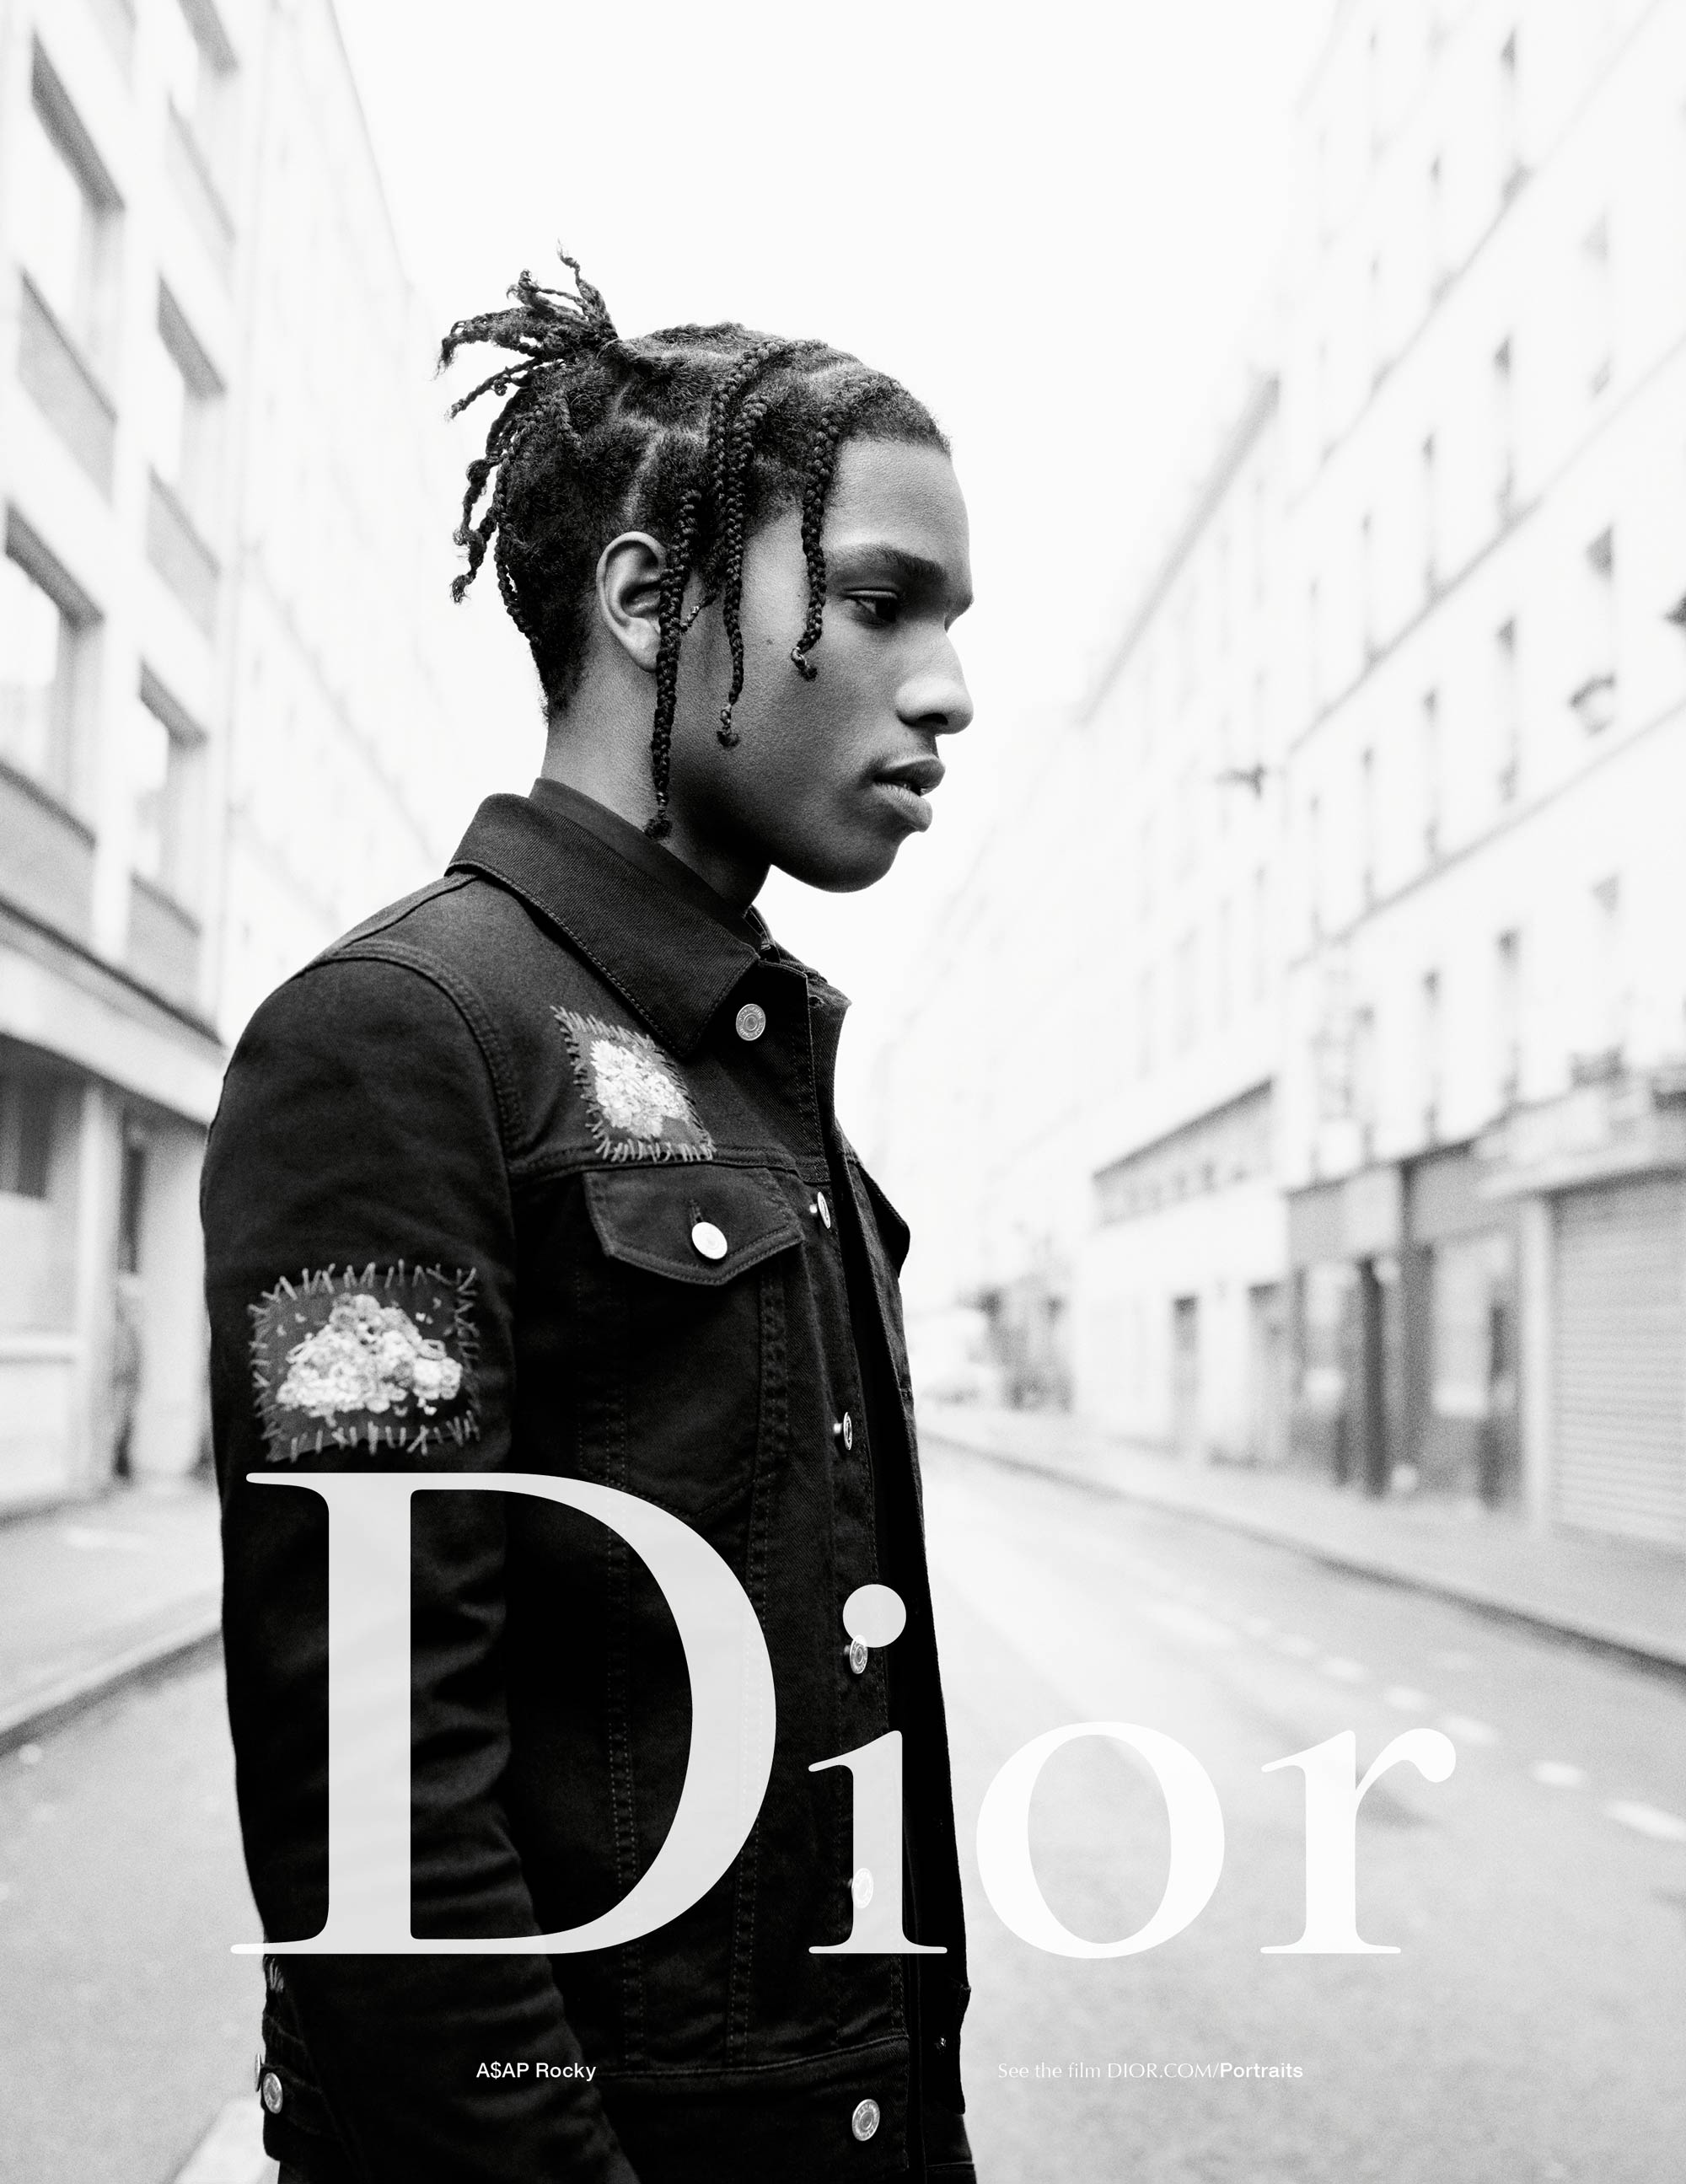 Dior Homme Summer 17 Ad Campaign Feat. A$AP Rocky & Boy George